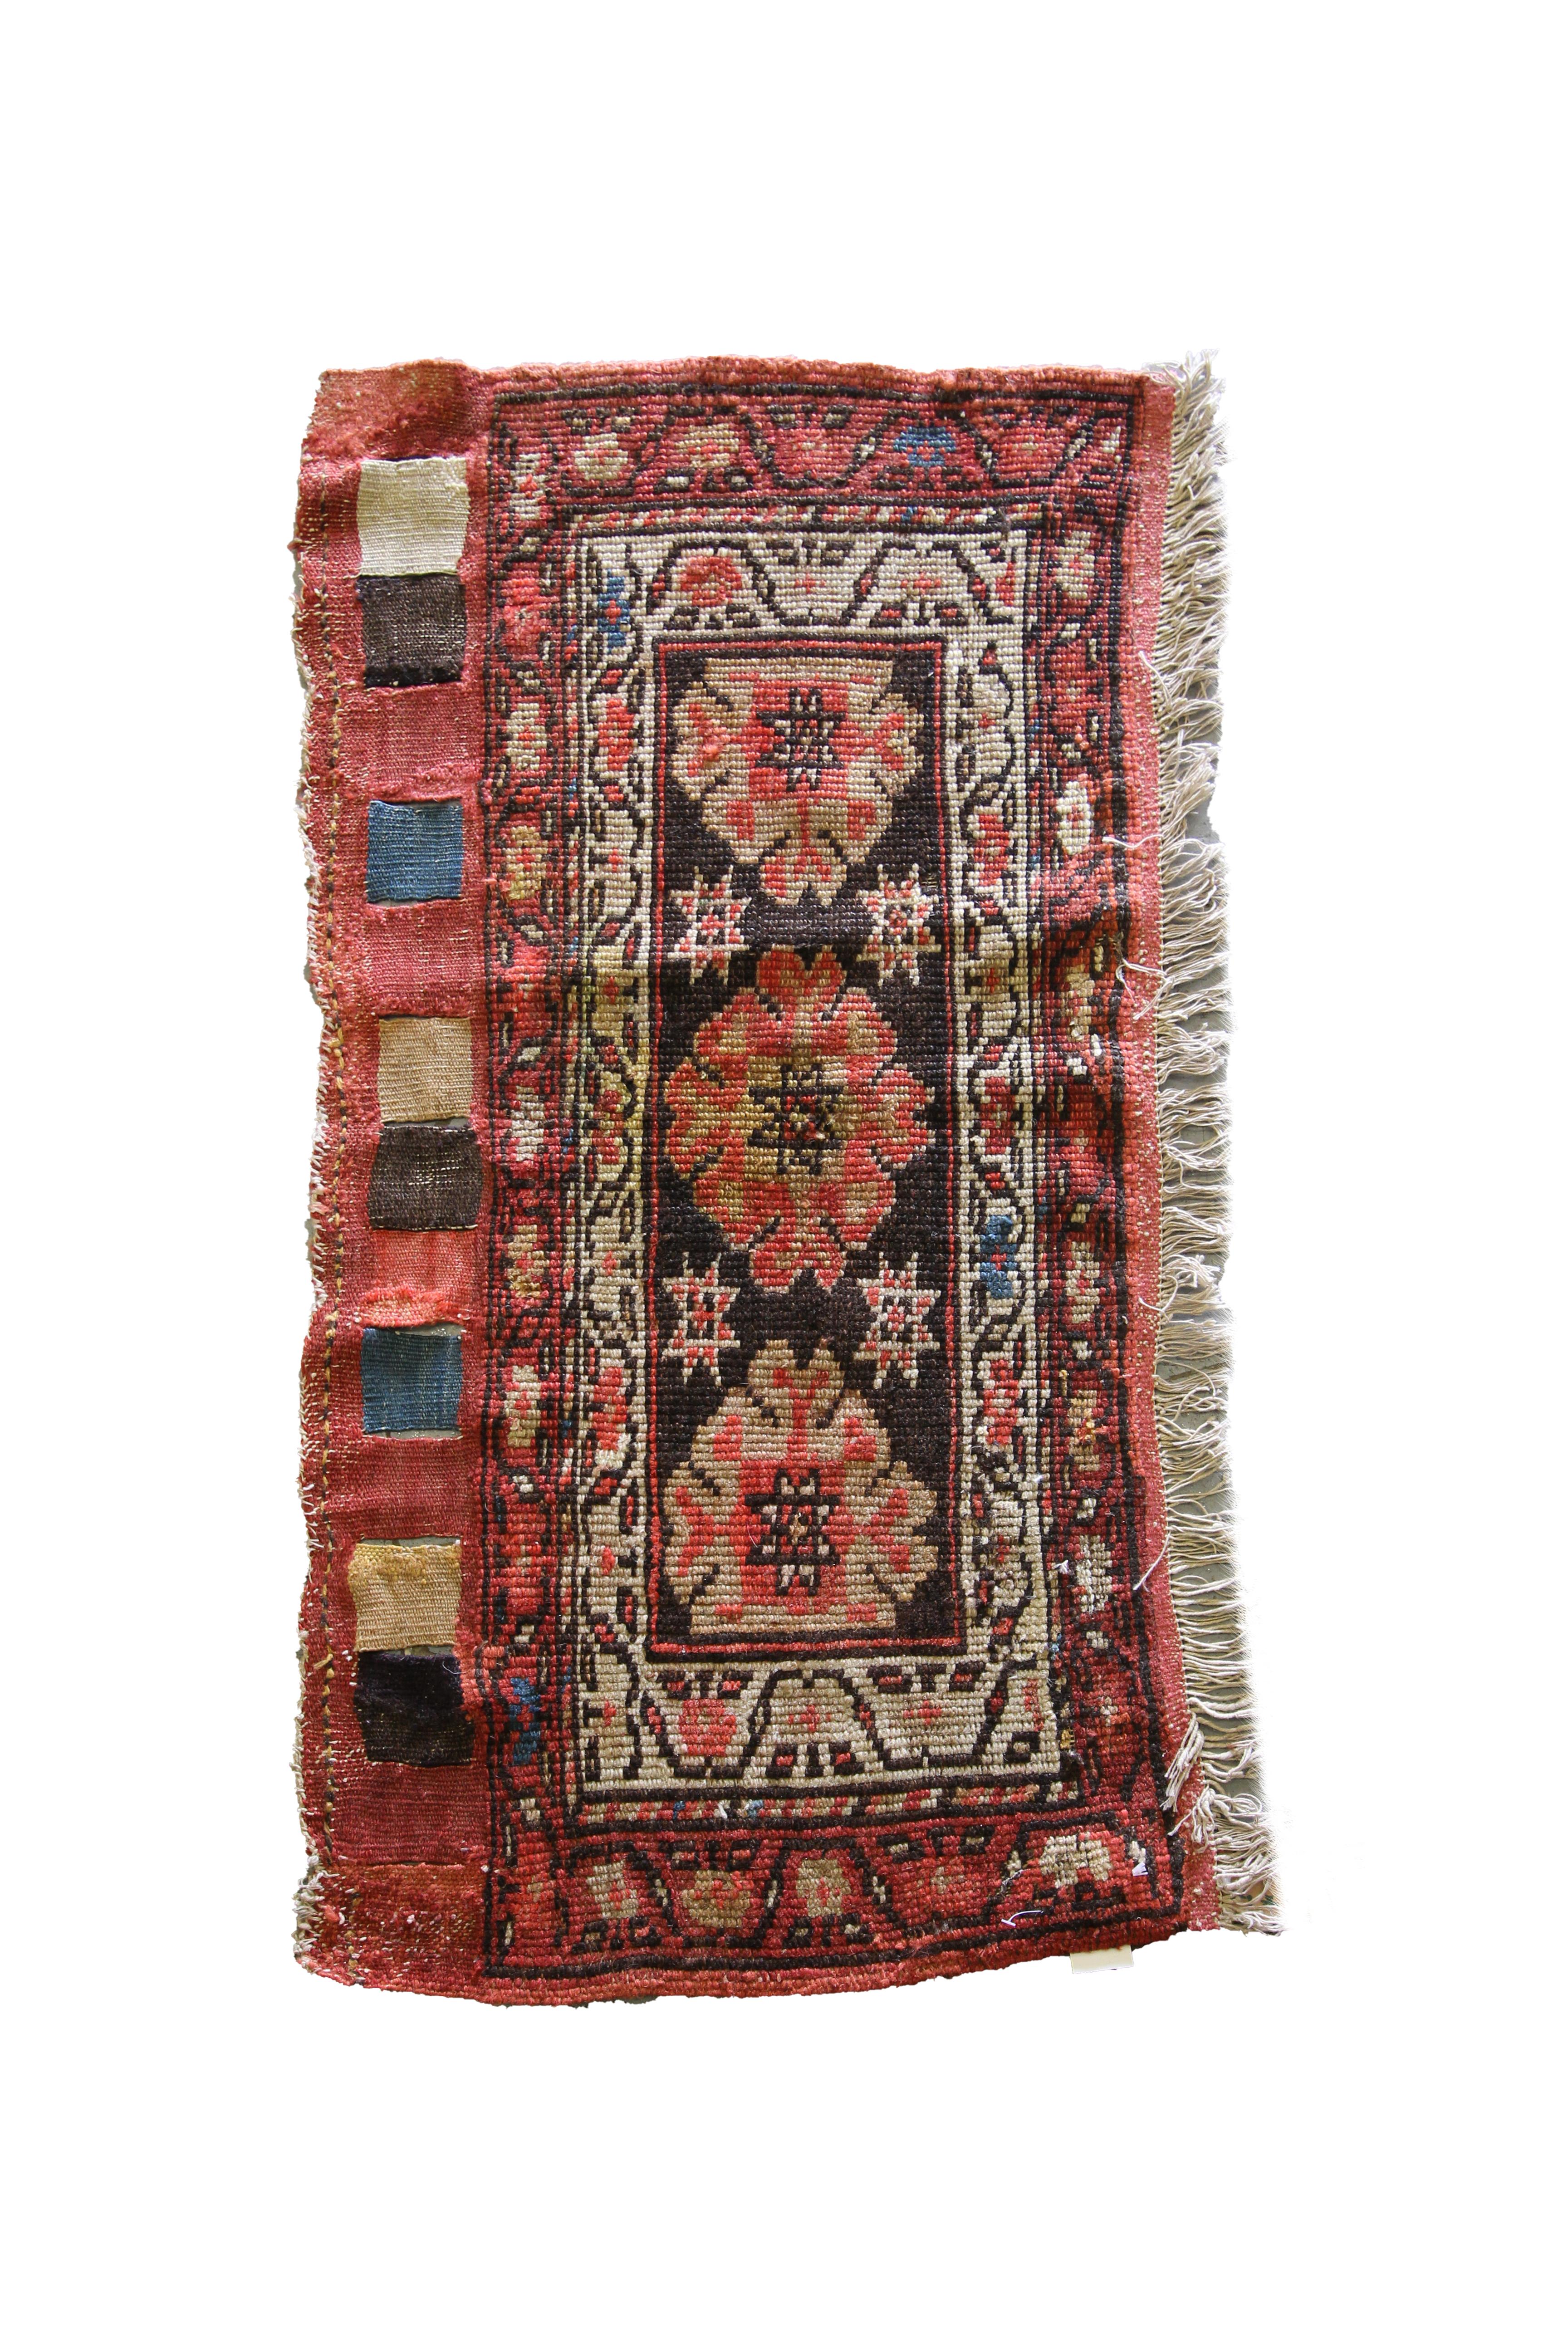 This beautiful unique rug is a rare antique Caucasian rug, woven by hand in the 1880s. The design features a trio of finely woven floral details made up of red and beige accents on a rich brown background. This has then been framed by a layered